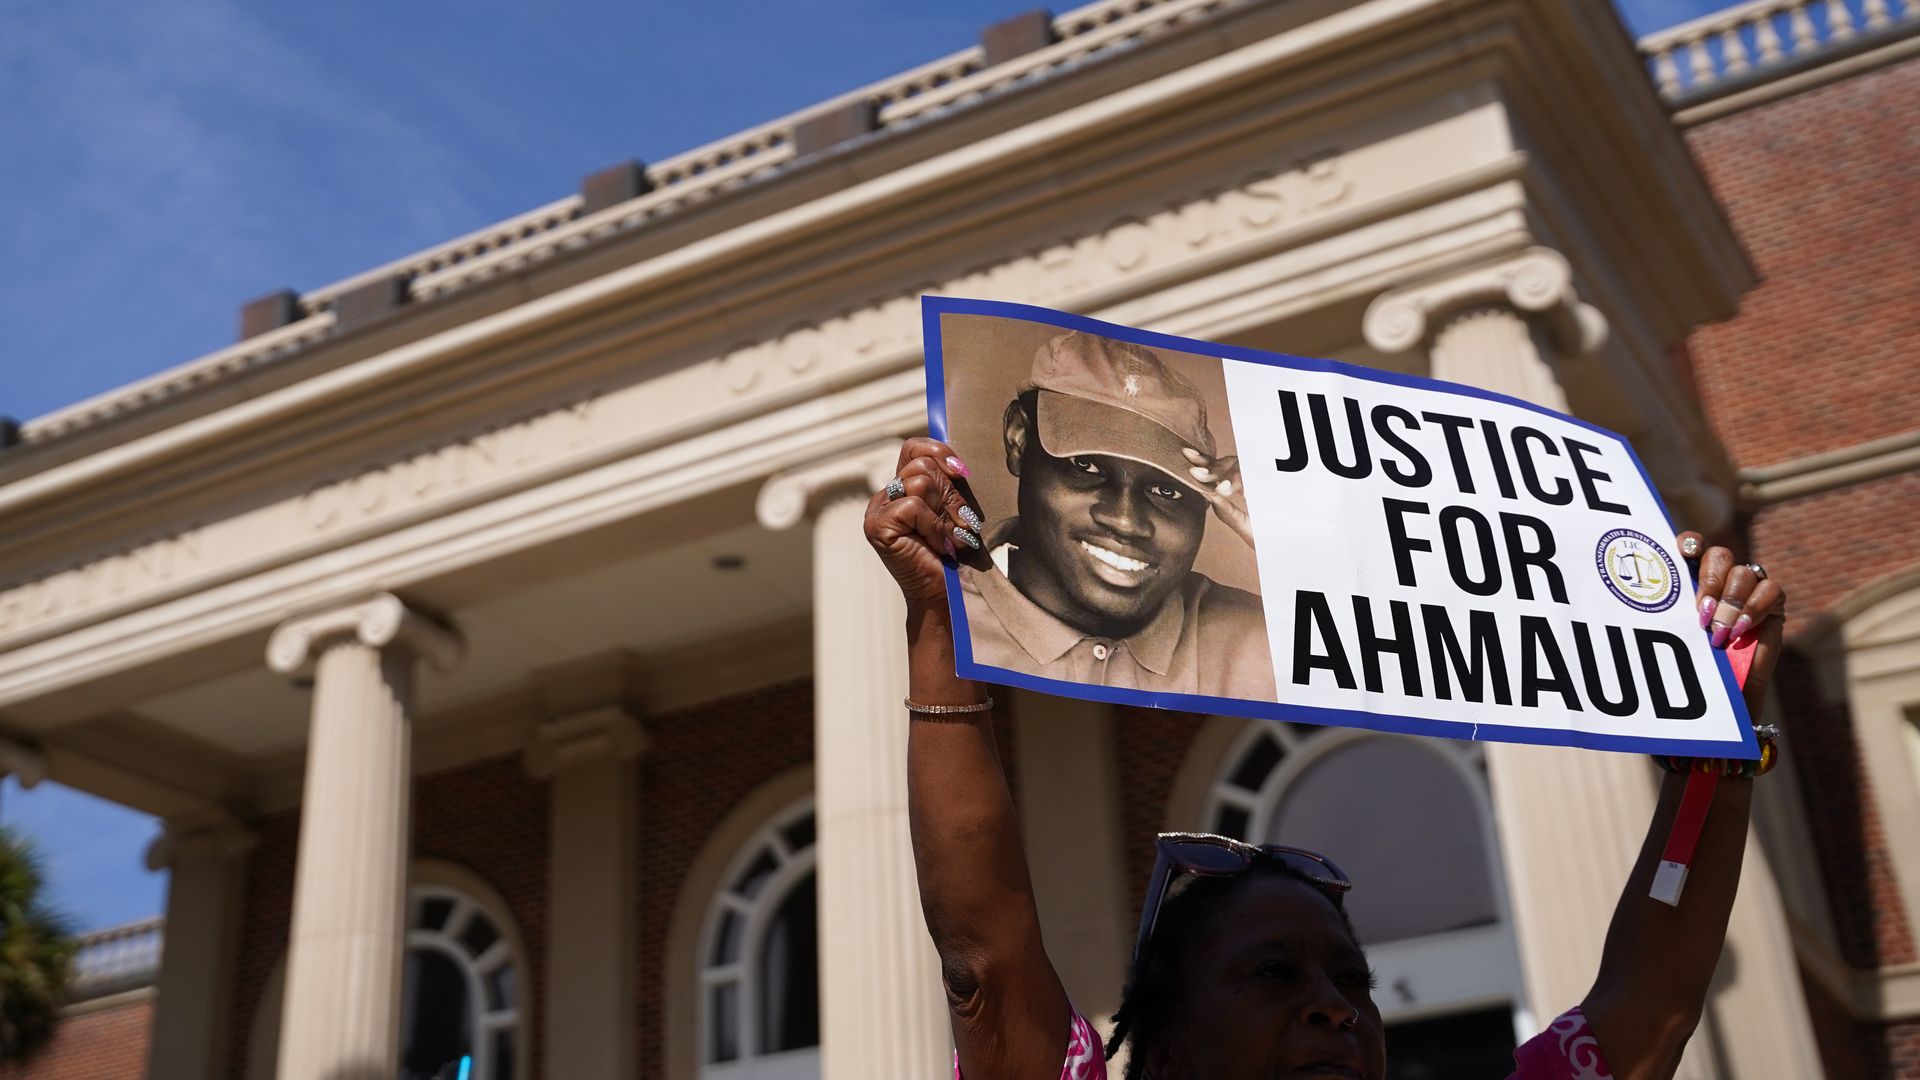 A demonstrator holds a sign at the Glynn County Courthouse as jury selection begins in the trial of the shooting death of Ahmaud Arbery on October 18, 2021 in Brunswick, Georgia